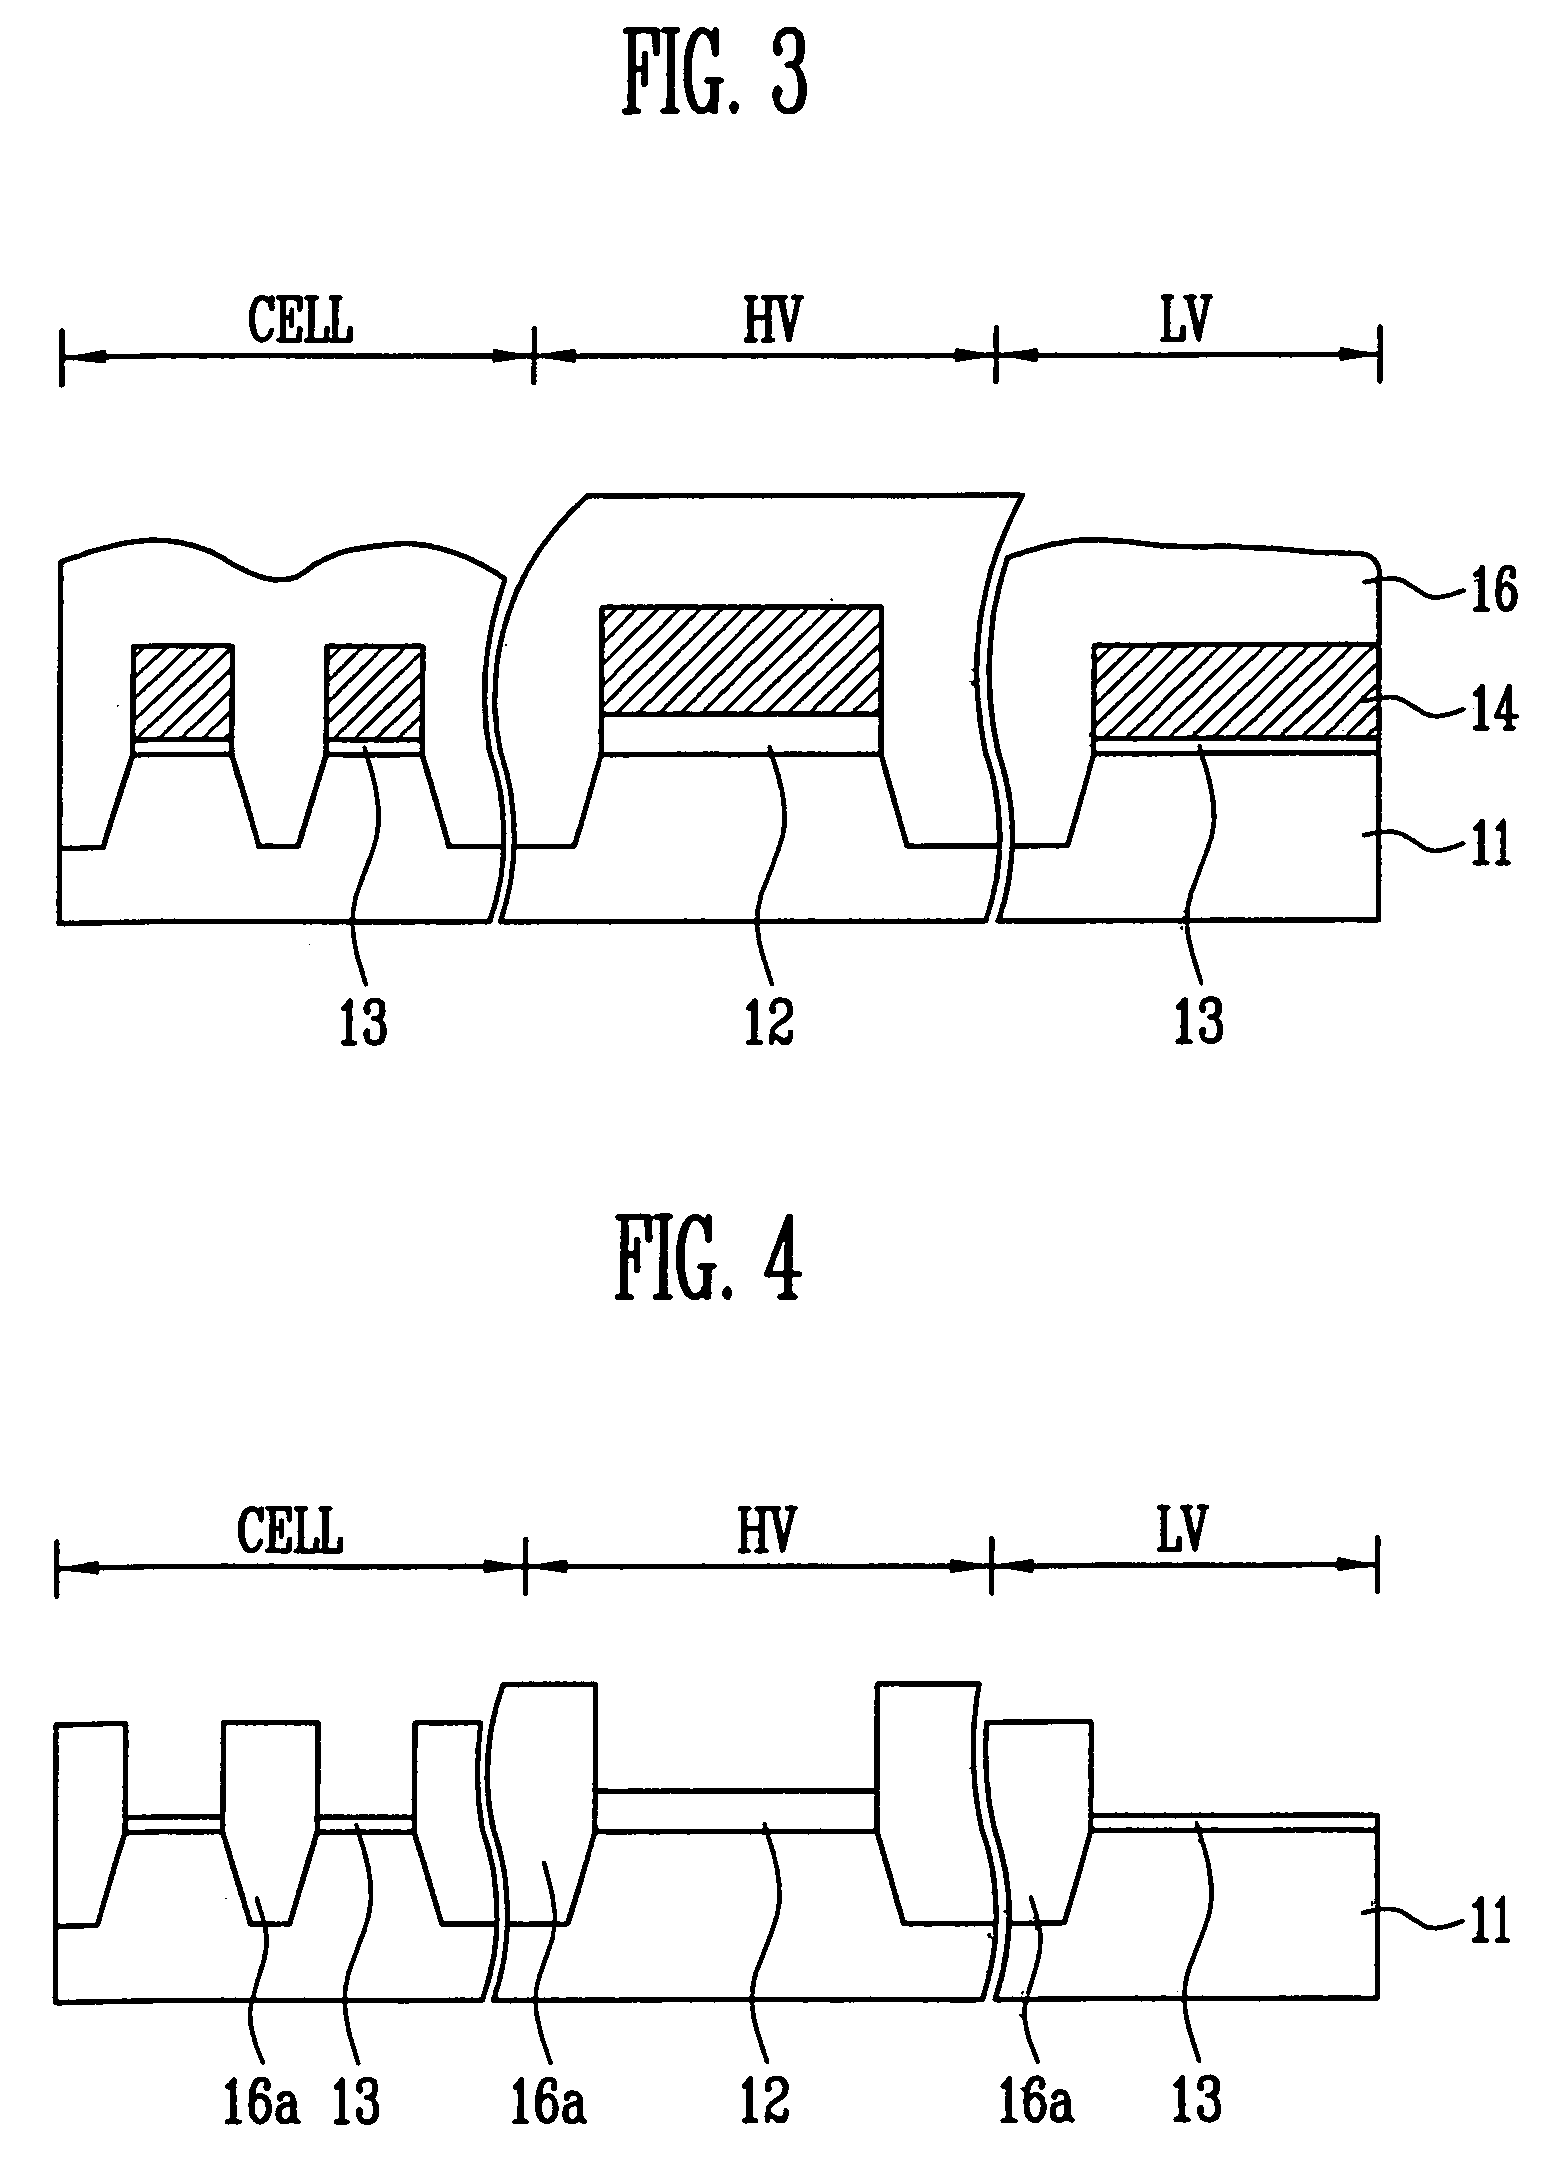 Method of manufacturing flash memory device